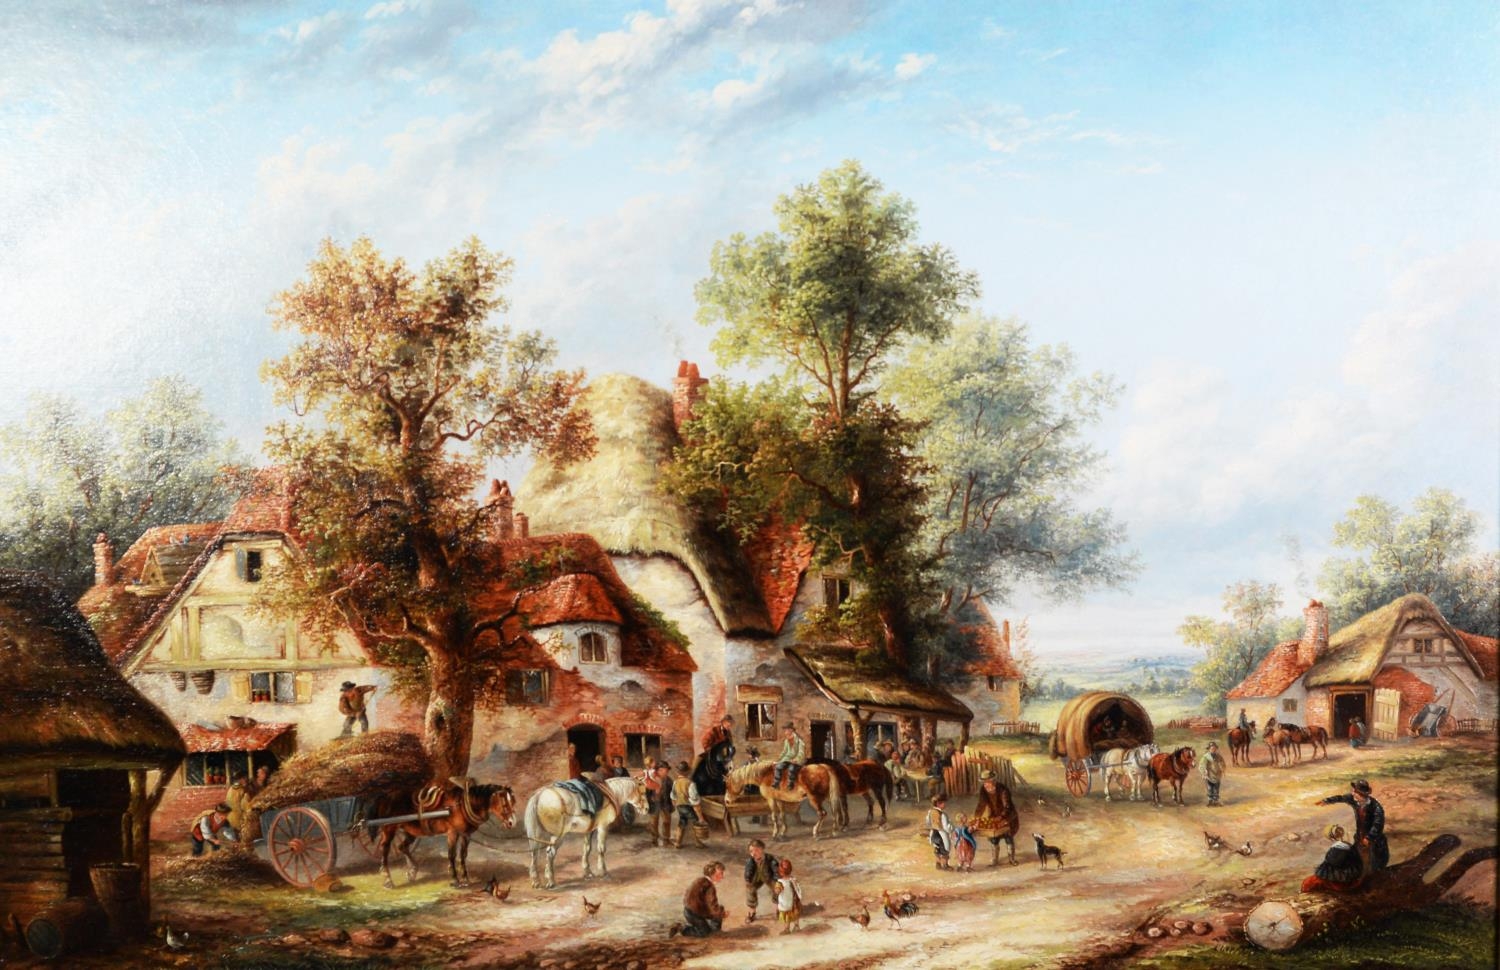 ATTRIBUTED TO EDWARD MASTERS (ACT. 1860-1880) OIL ON CANVAS c.1860 'A Busy Village Scene' c.1860,